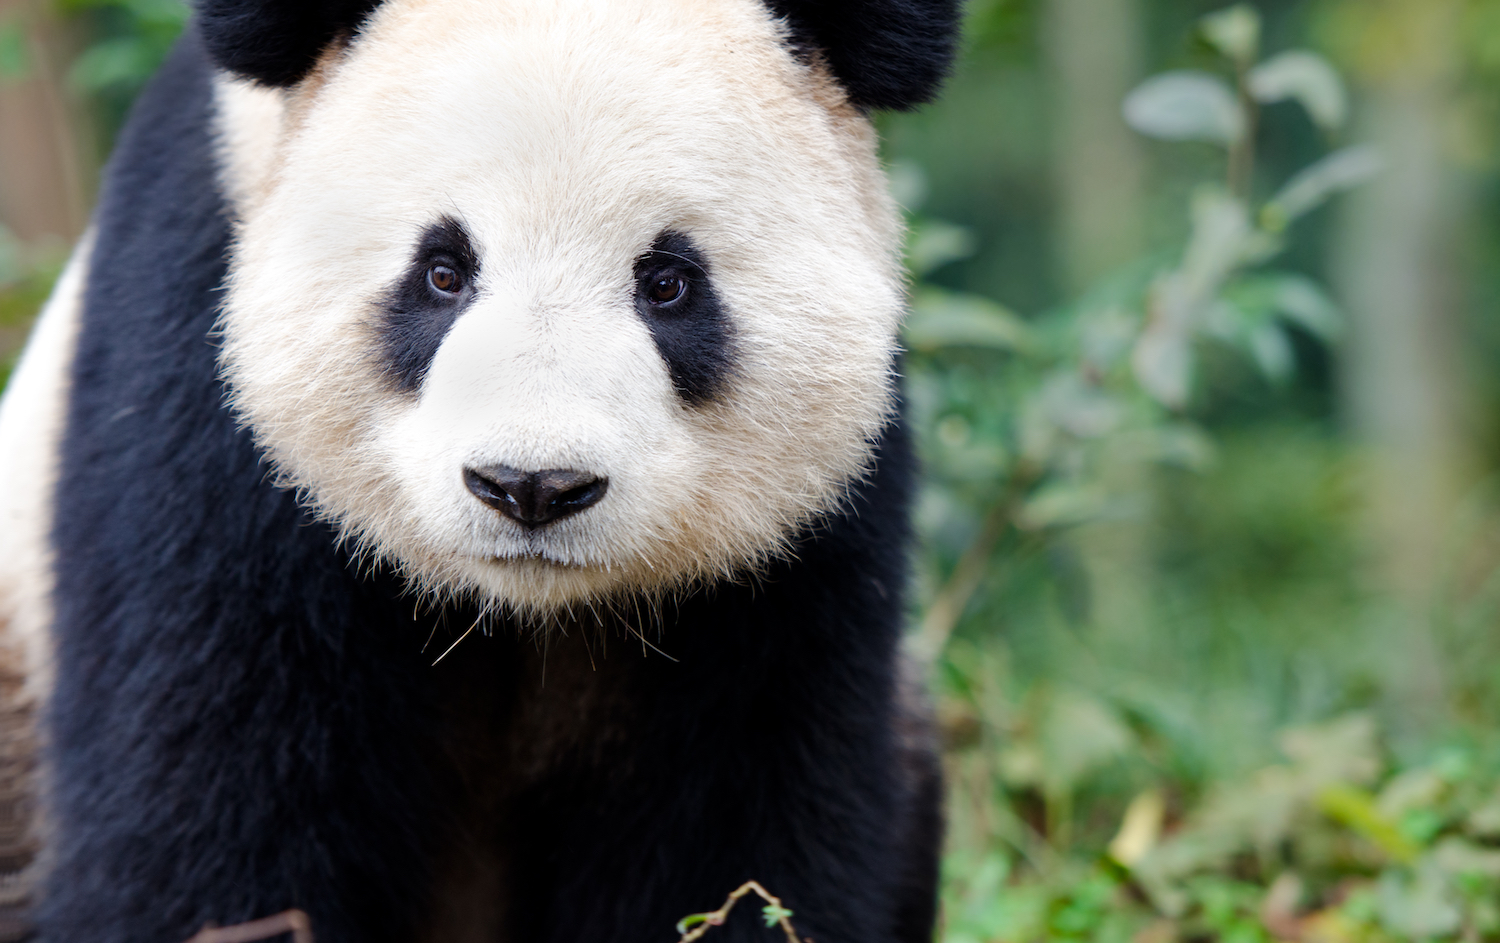 Are Giant Pandas only found in China?